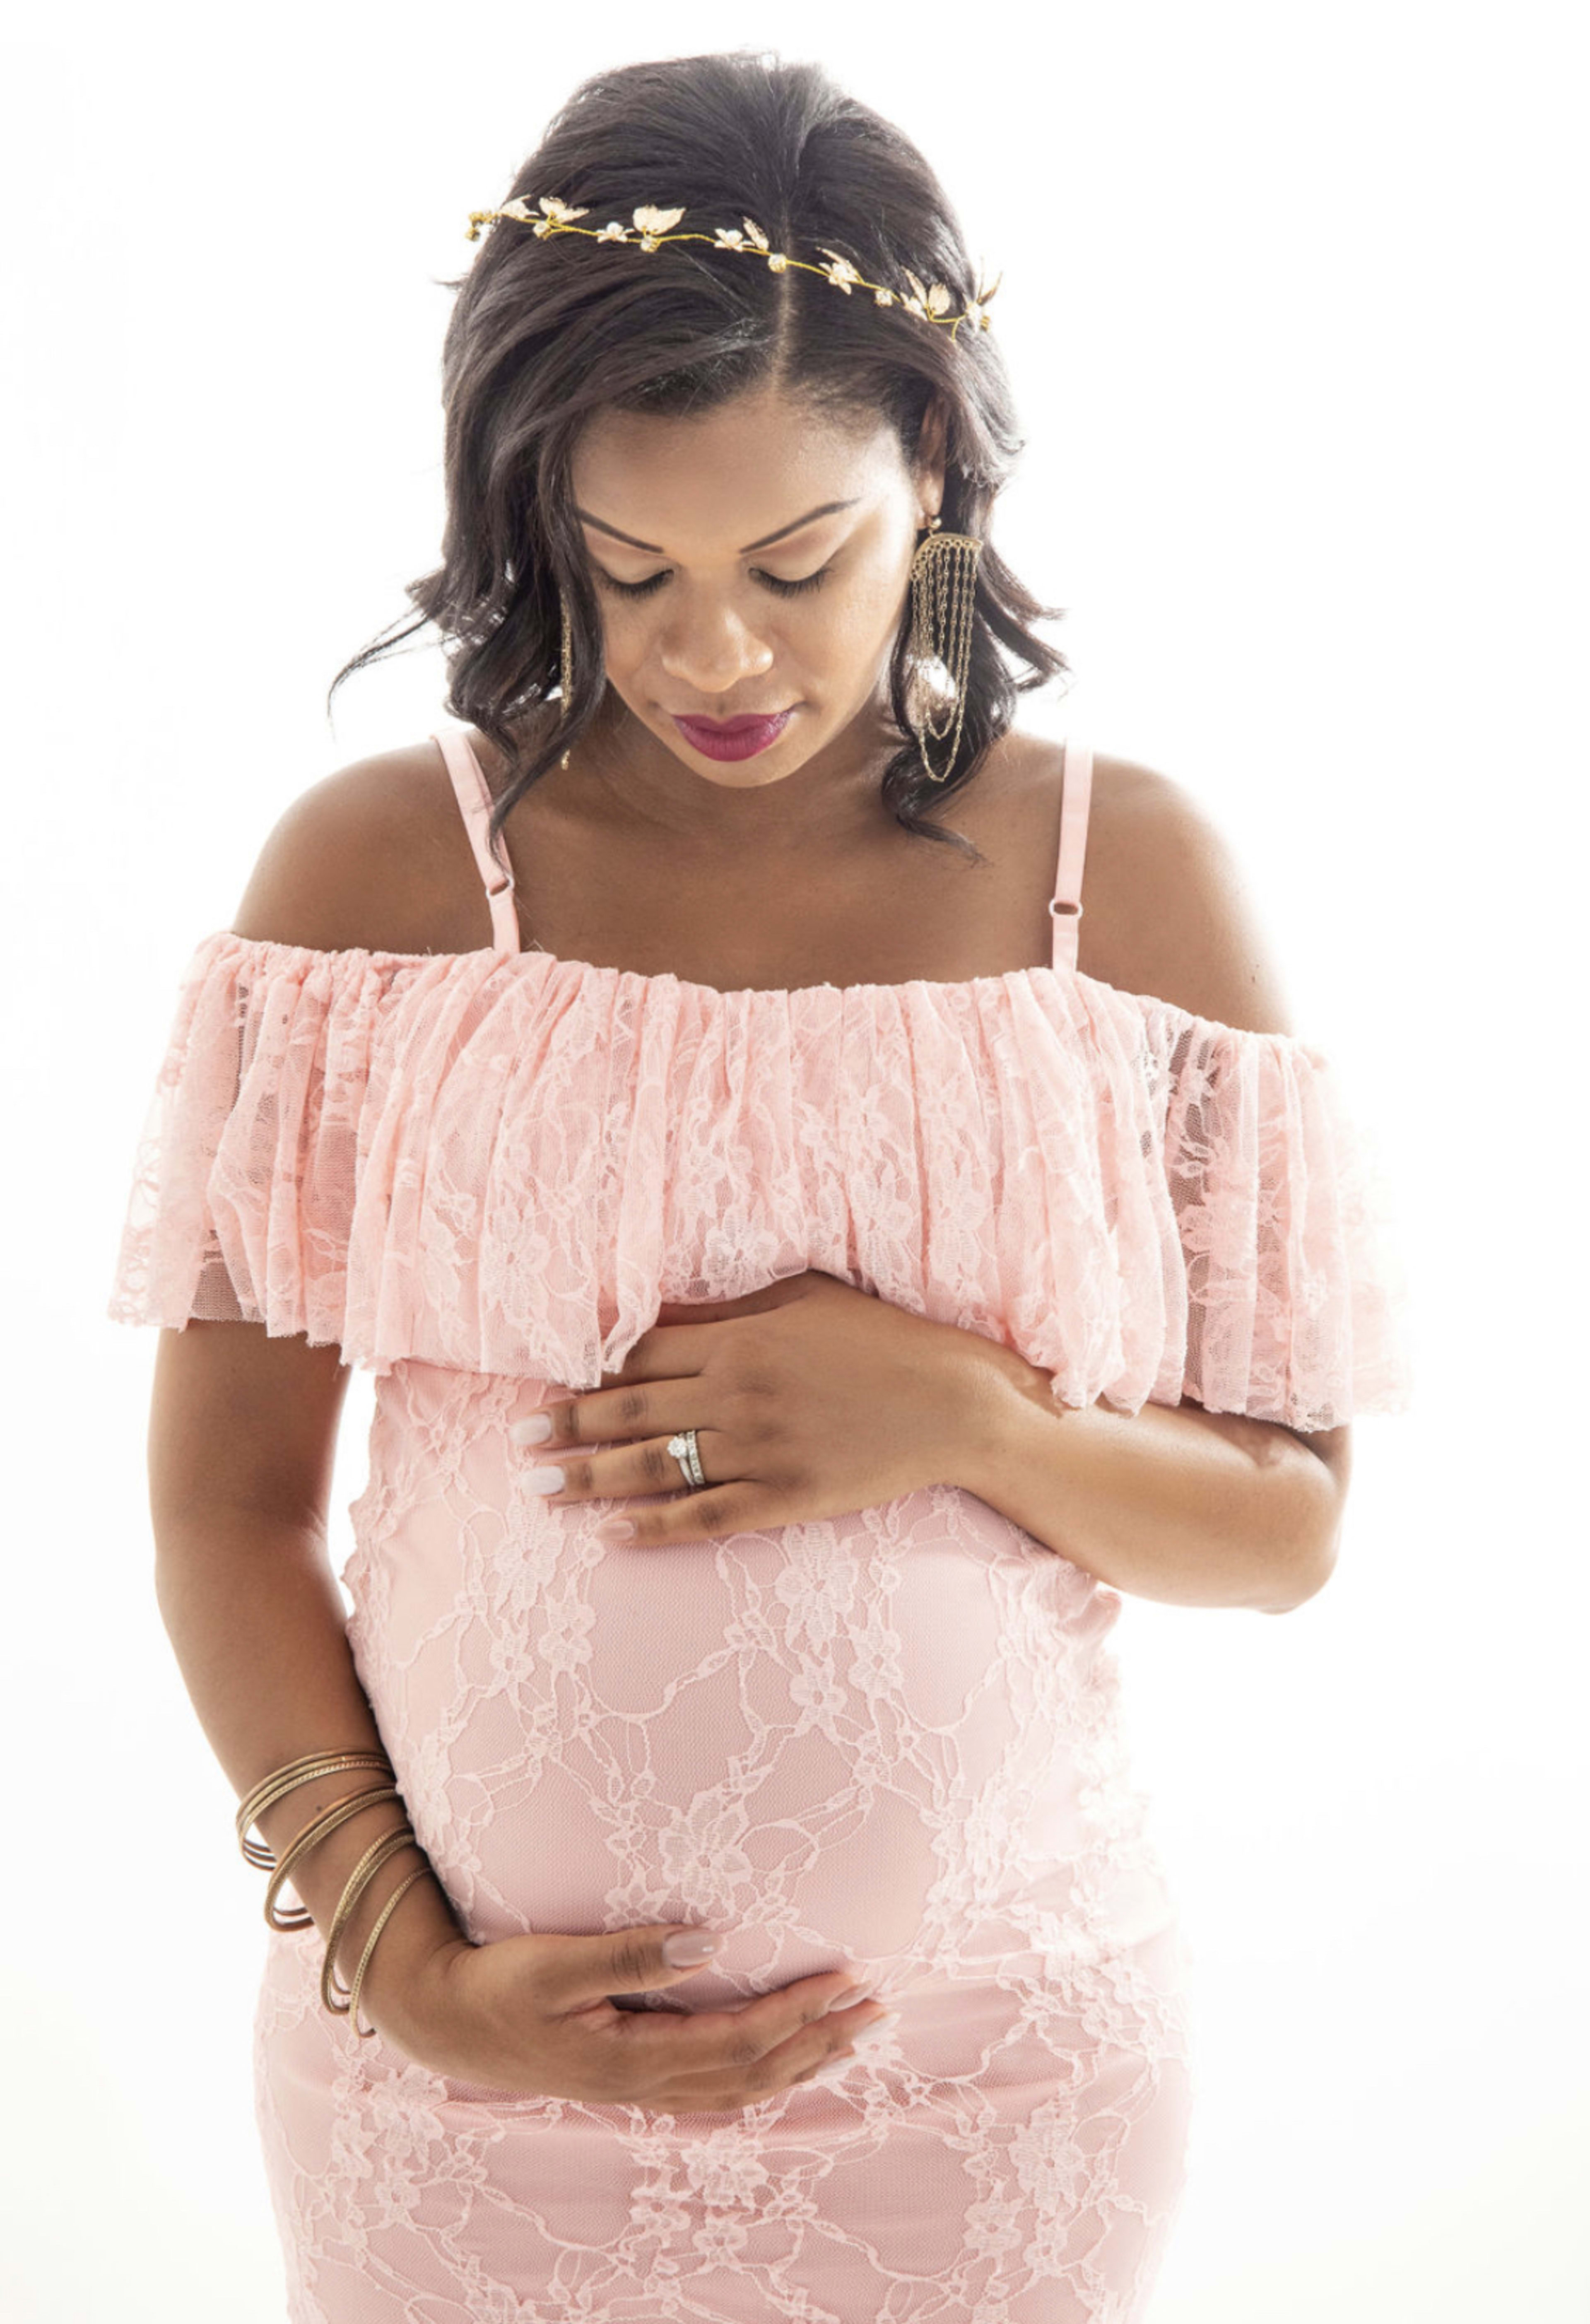 A pregnant woman in a boho pink dress cradling her belly during a maternity photoshoot.